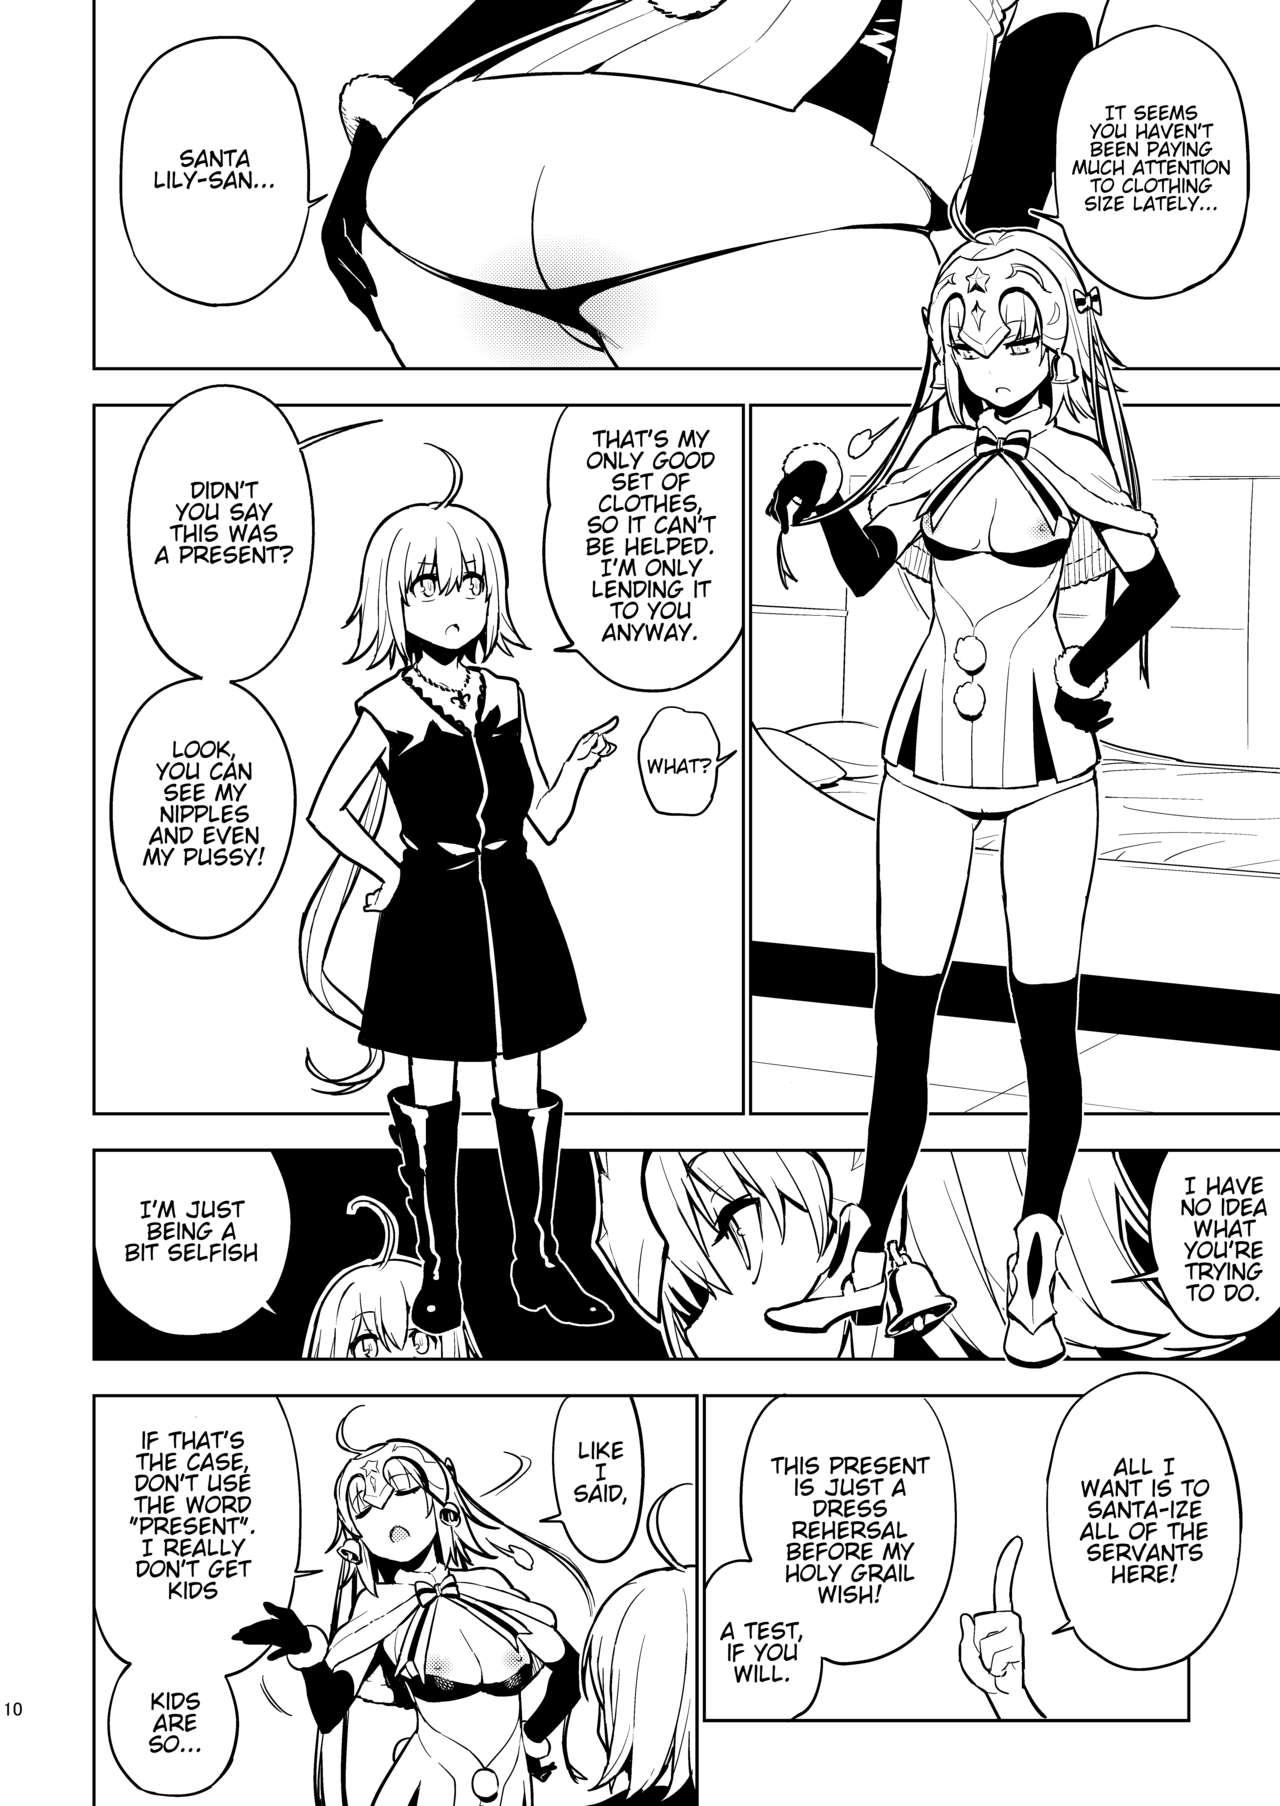 Topless SO BORED - Fate grand order Blow Jobs Porn - Page 8